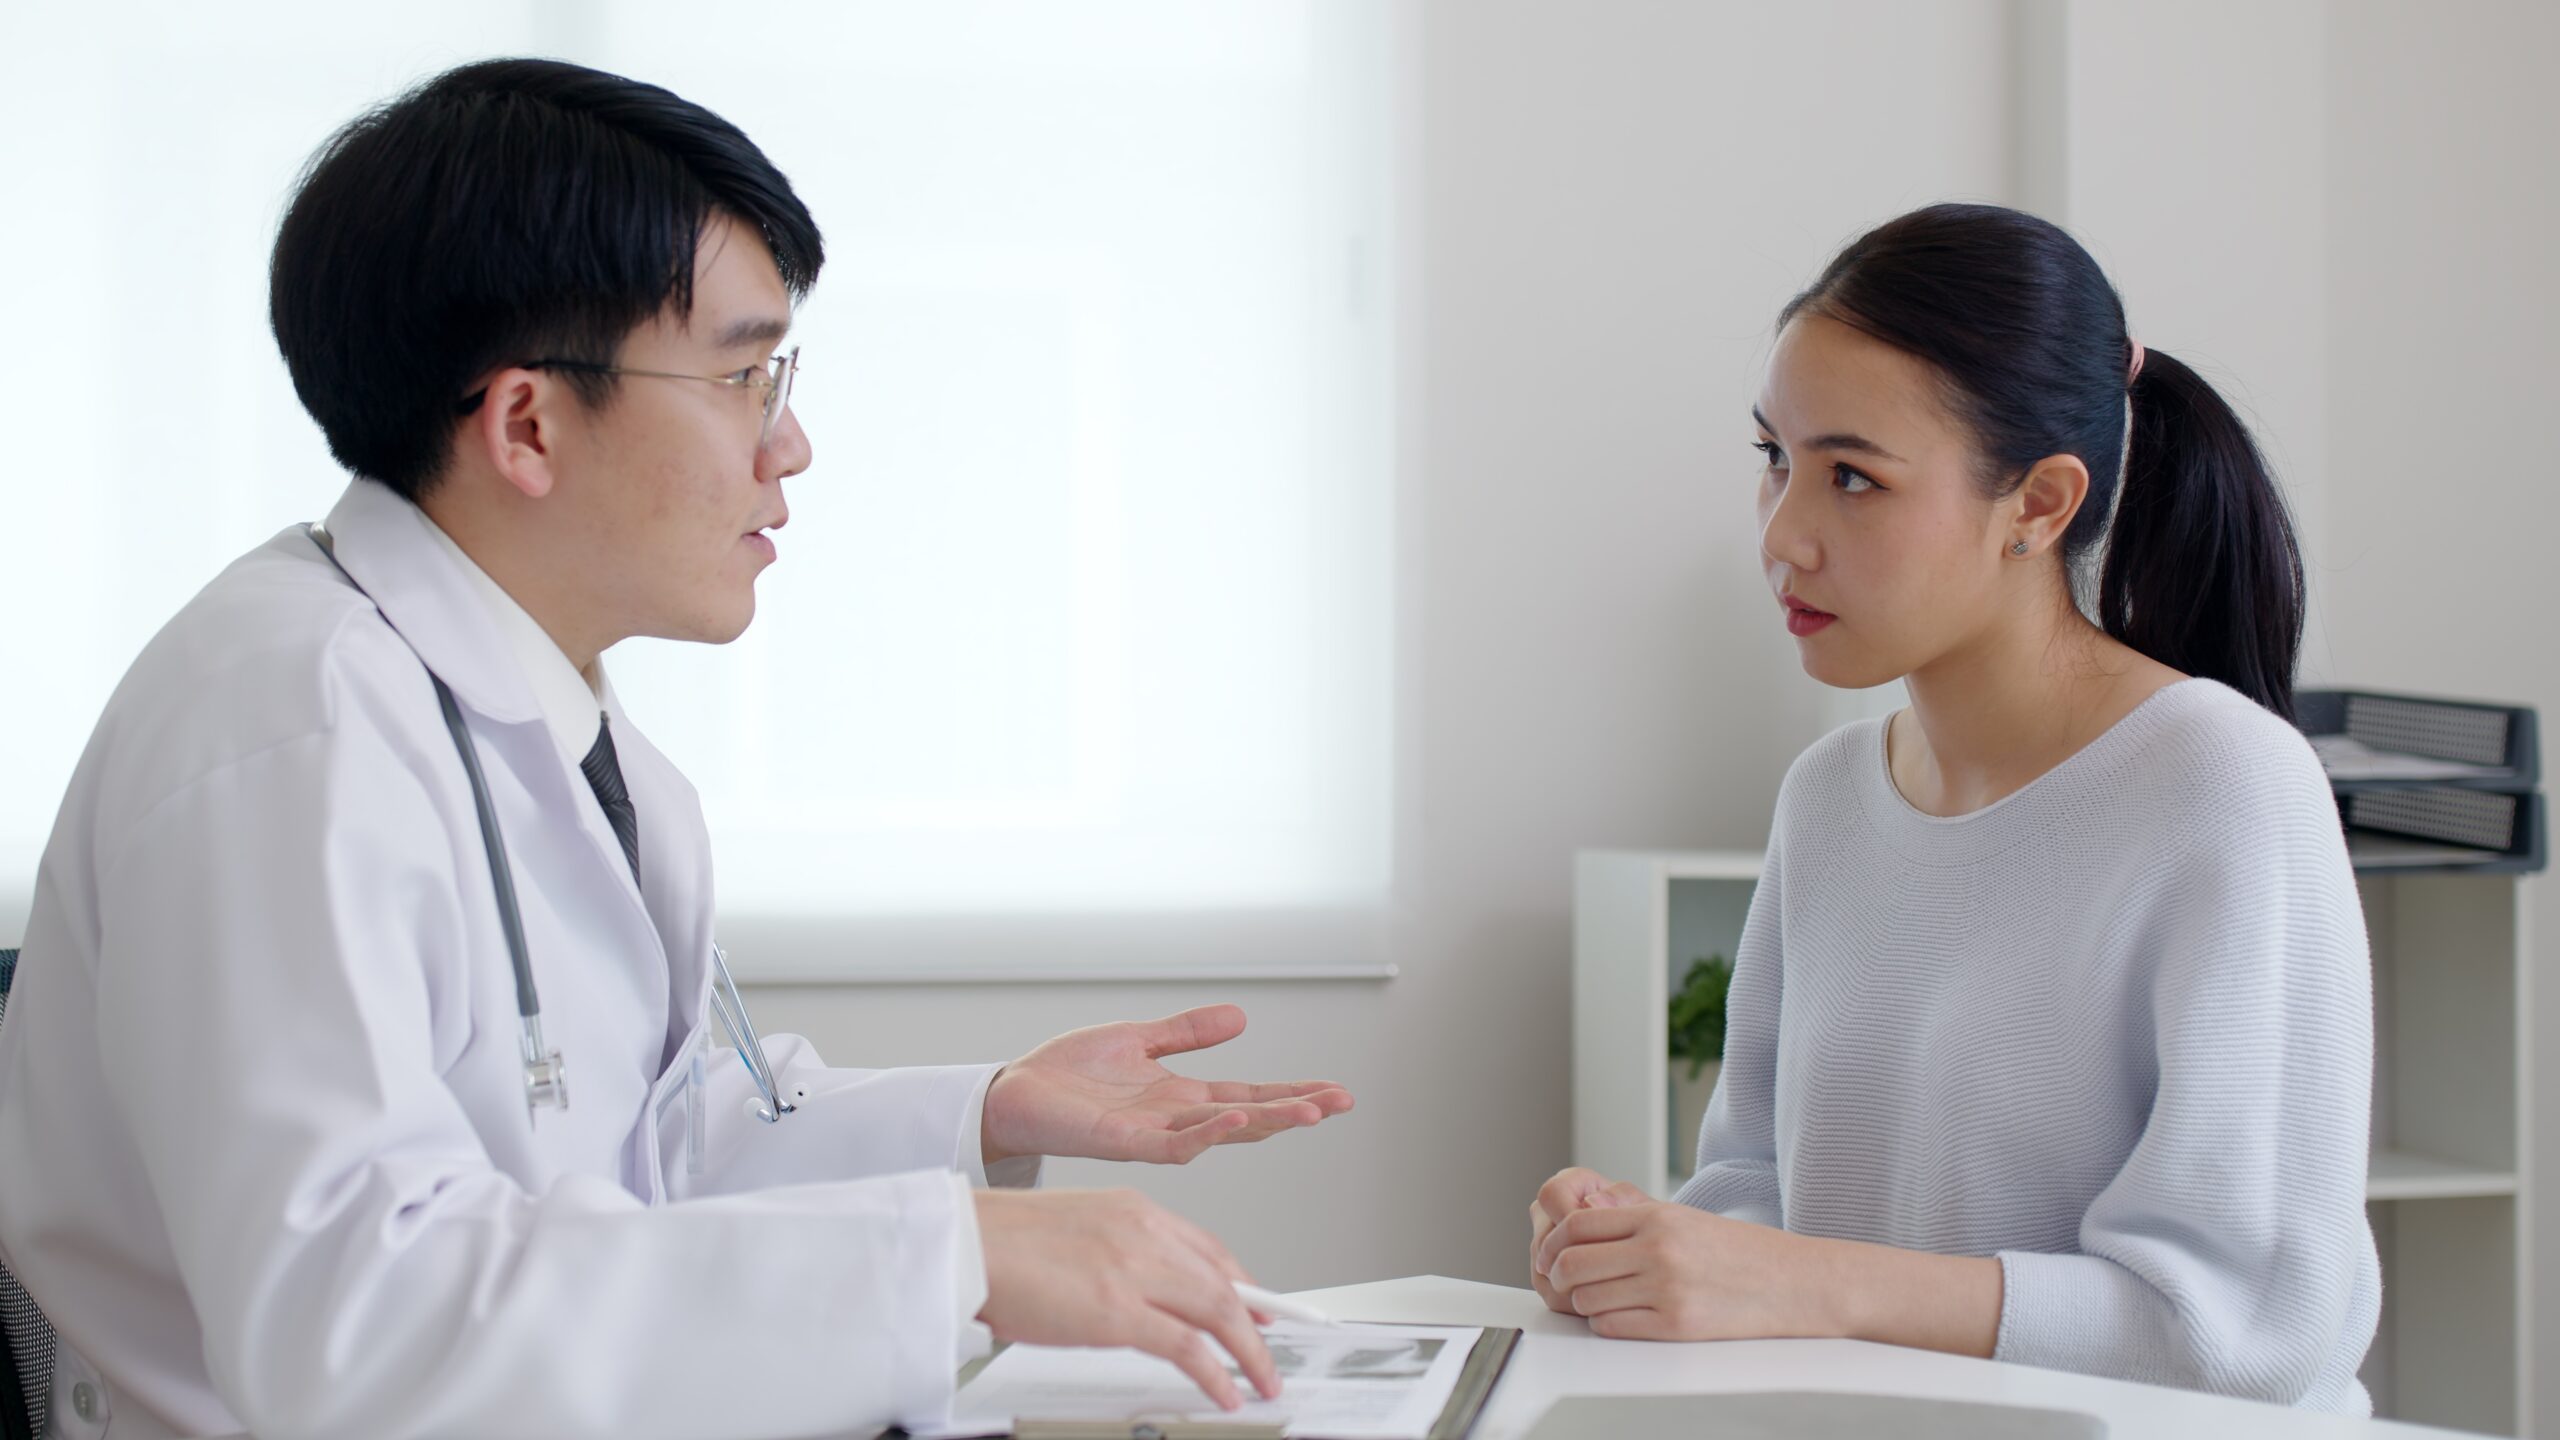 Plastic surgeon discussing procedure details with a patient during a consultation session.